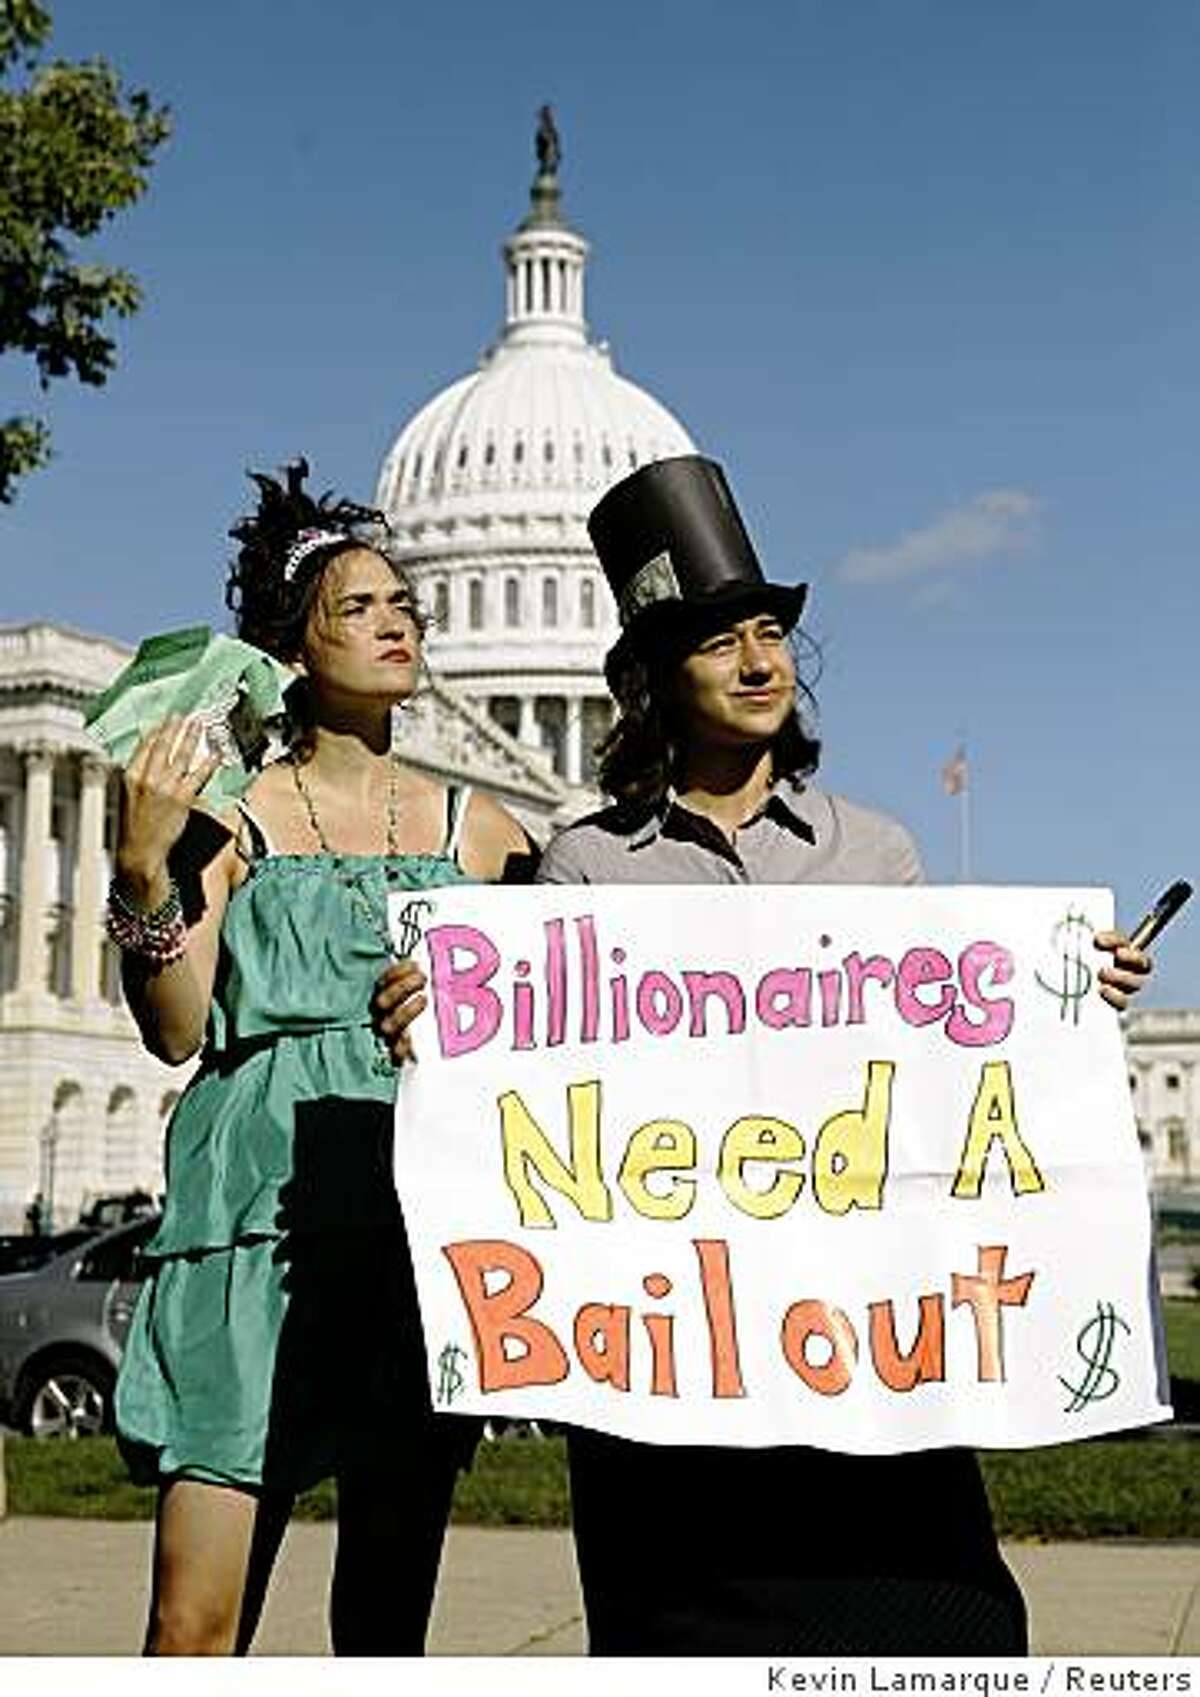 Protesters perform a skit mocking the economic bailout plan in front of the Capitol building in Washington October 2, 2008. The House is expected to vote Friday on the $700 billion financial rescue plan which was passed by the Senate last night. REUTERS/Kevin Lamarque (UNITED STATES)